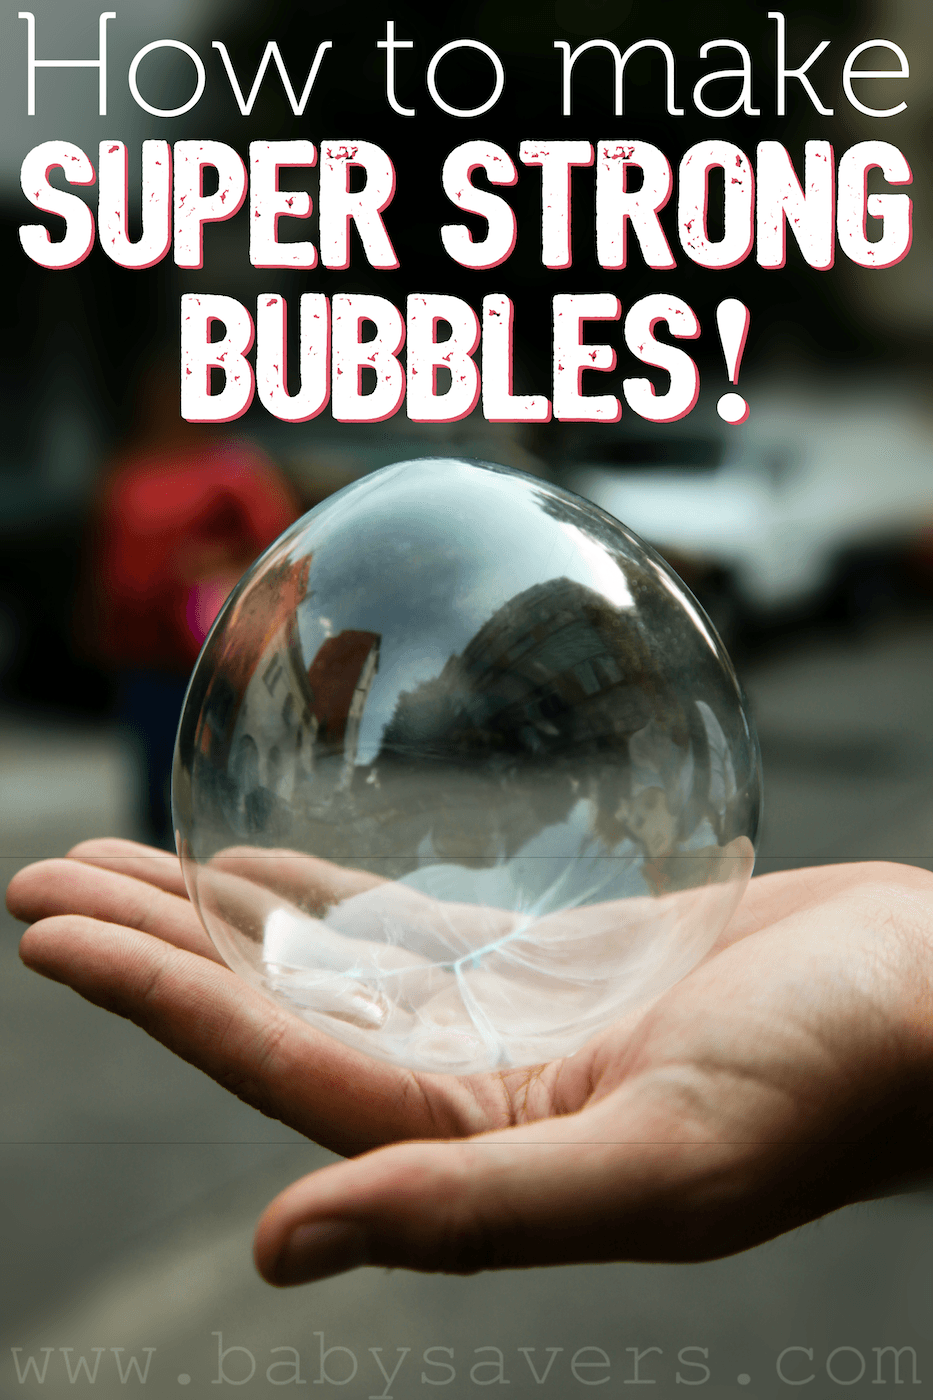 How to make super strong bubbles